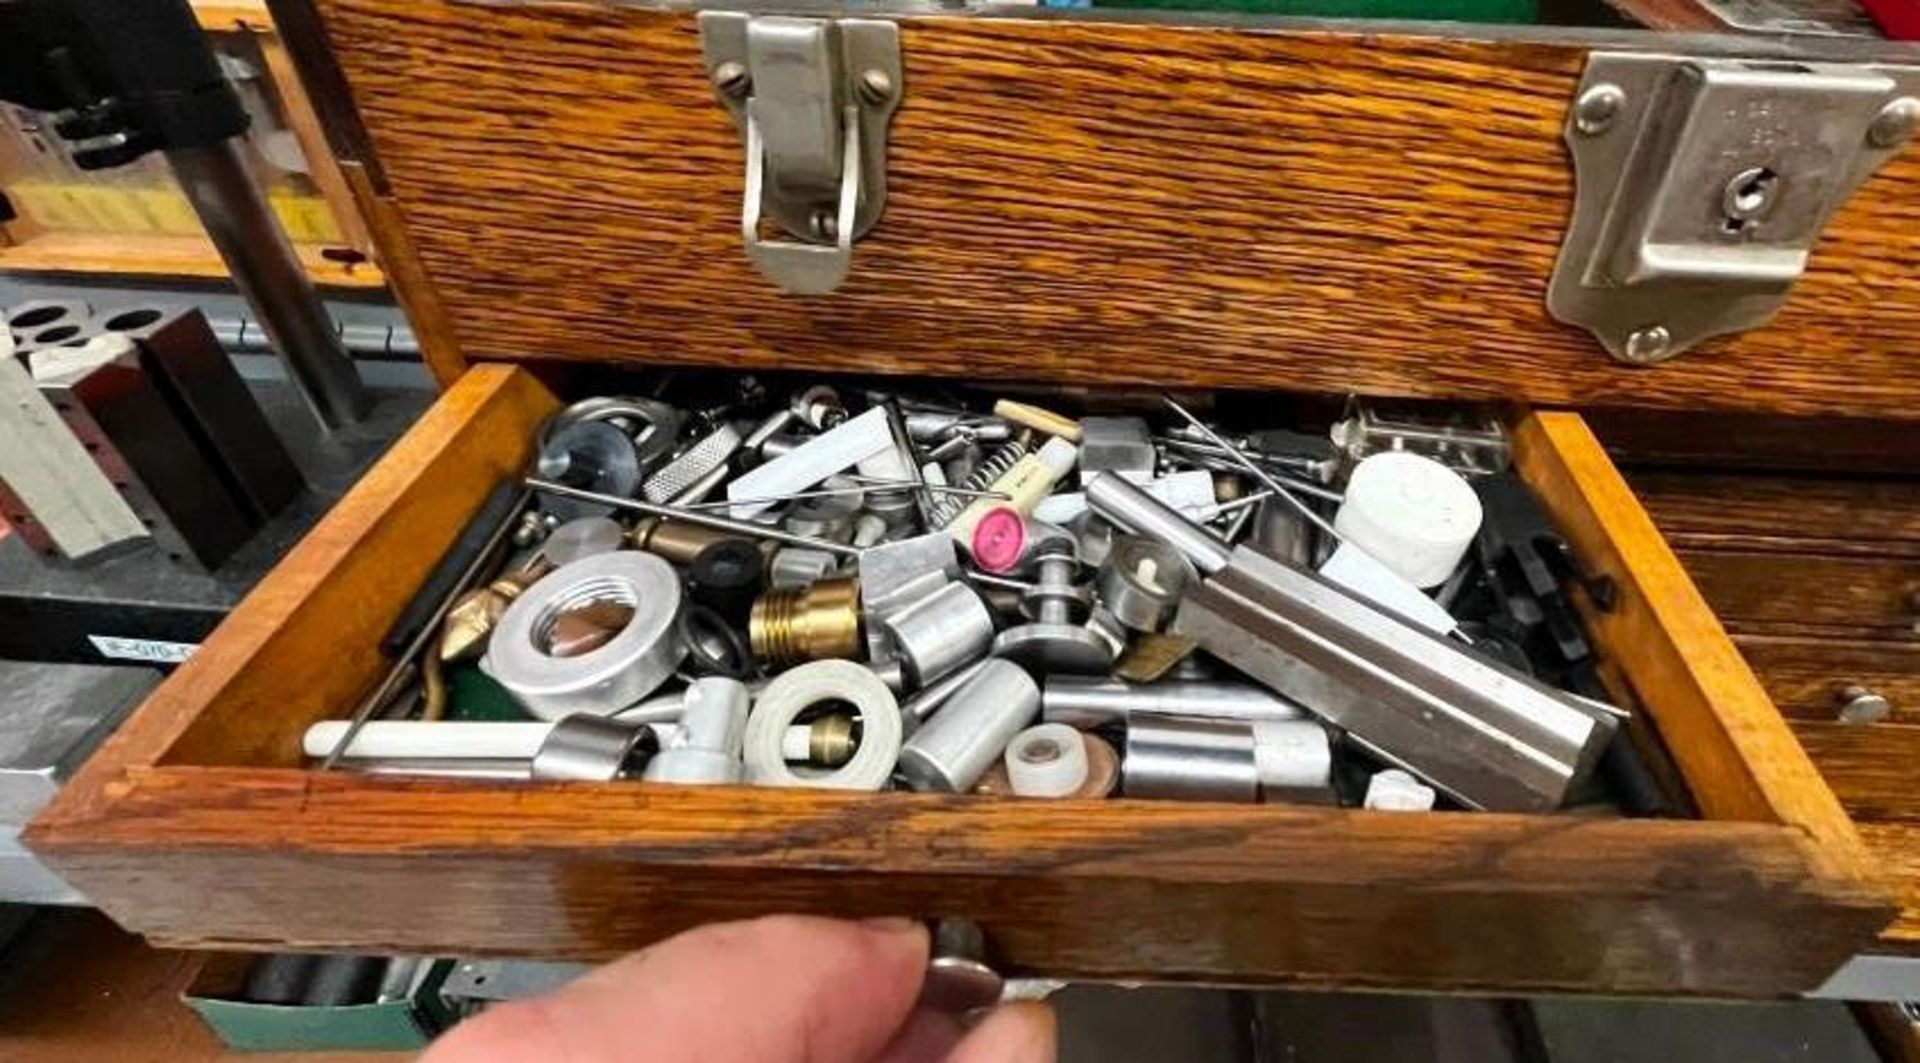 Misc Bits, Taps, Dies & Other hardware - same items are pictured in toolbox, in box and in bags. - Image 15 of 18